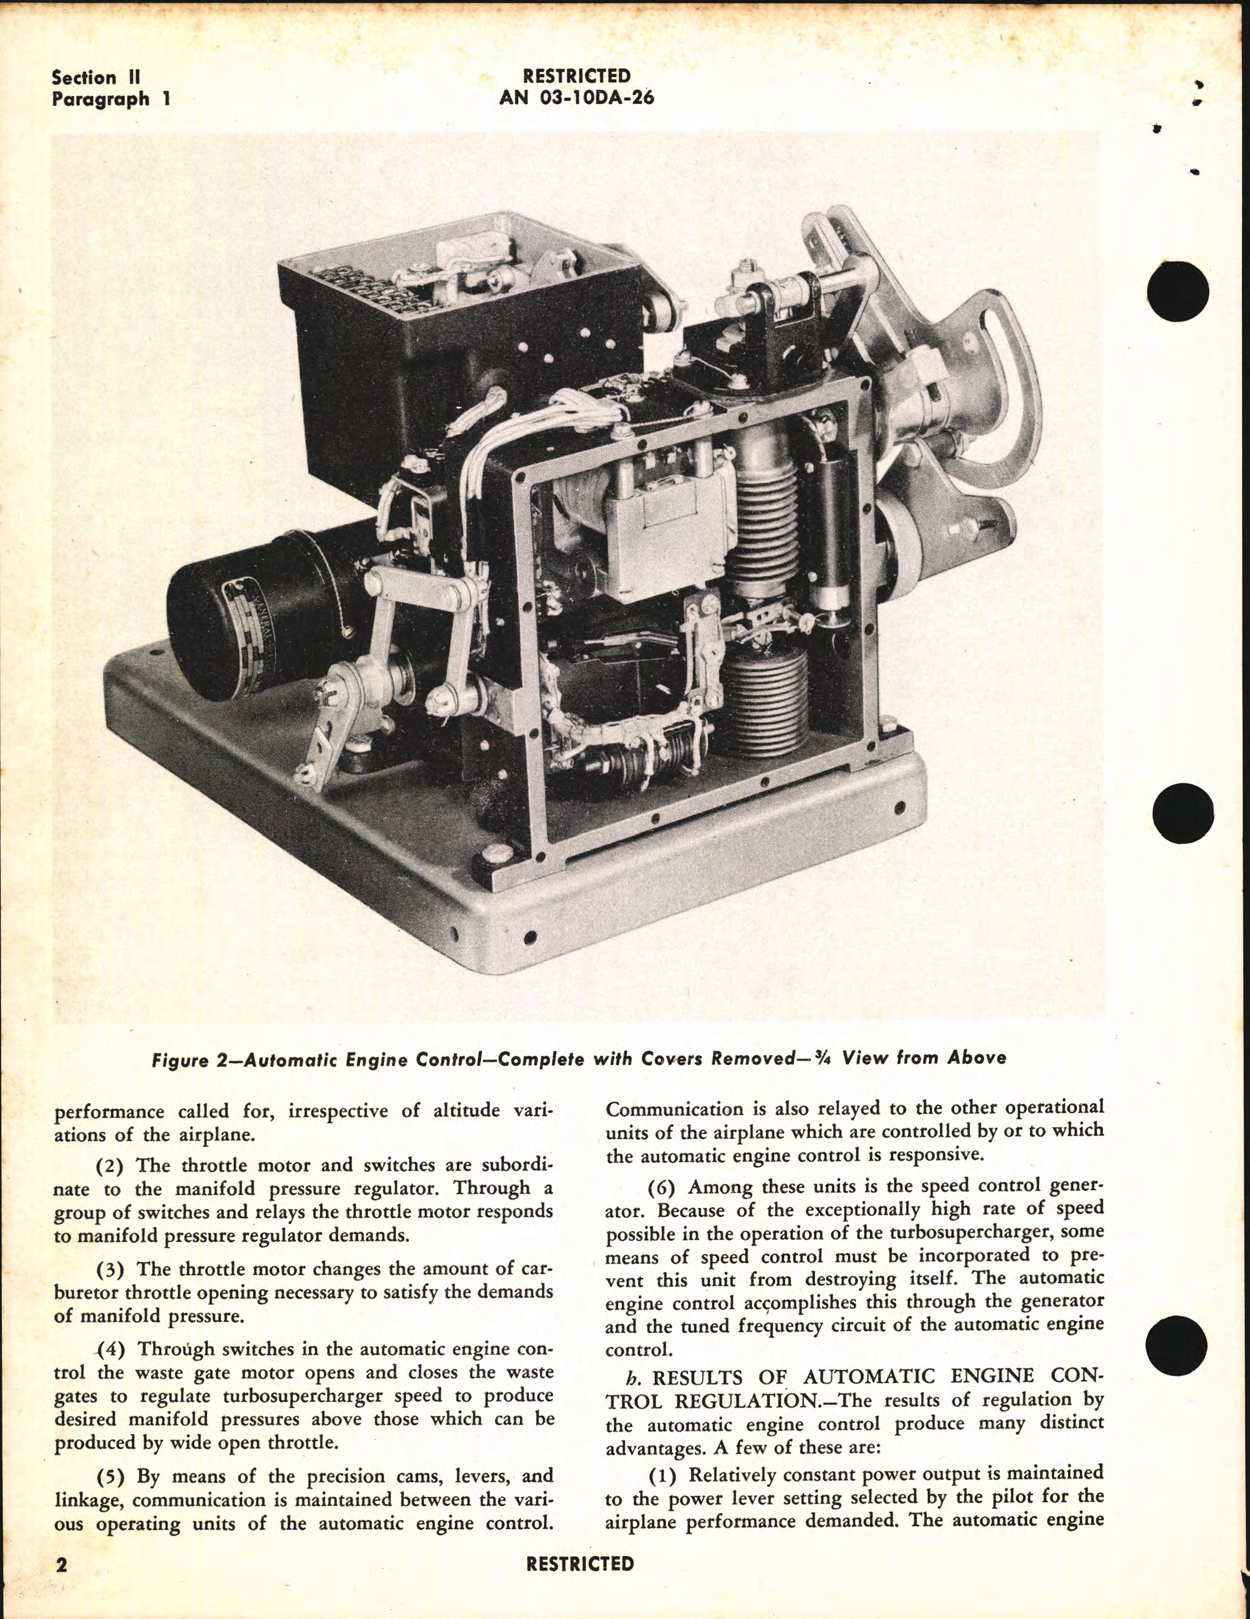 Sample page 6 from AirCorps Library document: Operation, Service, & Overhaul Instructions with Parts Catalog for Automatic Engine Control Type C-1 Model 3GPC1A1